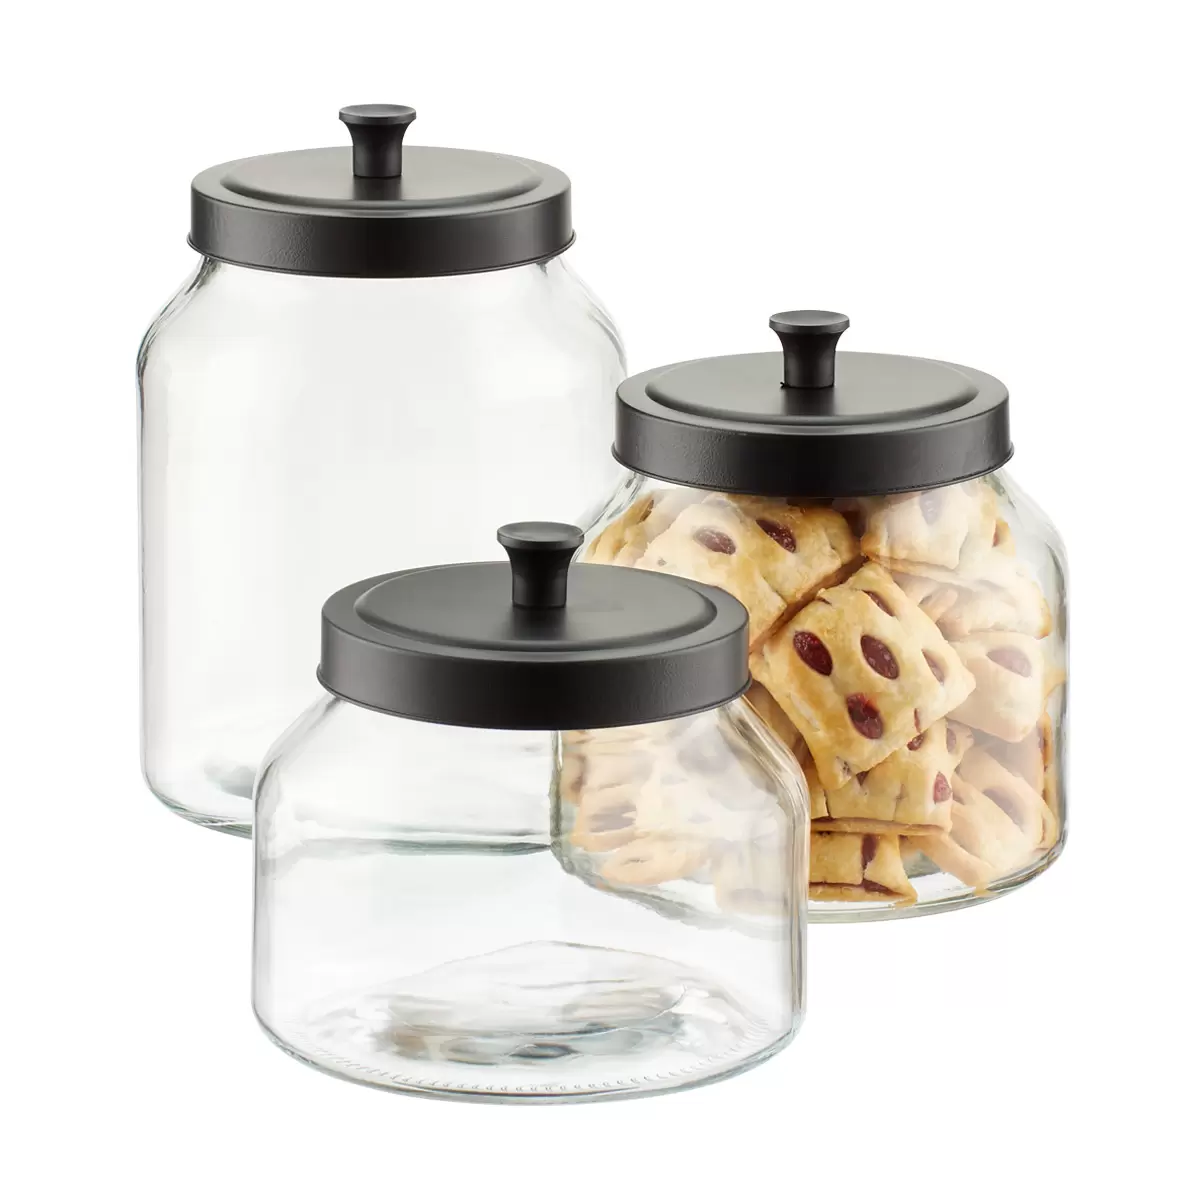 STORAGE JARS Containers with Screw Top Lids Food Canisters SET OF 6 